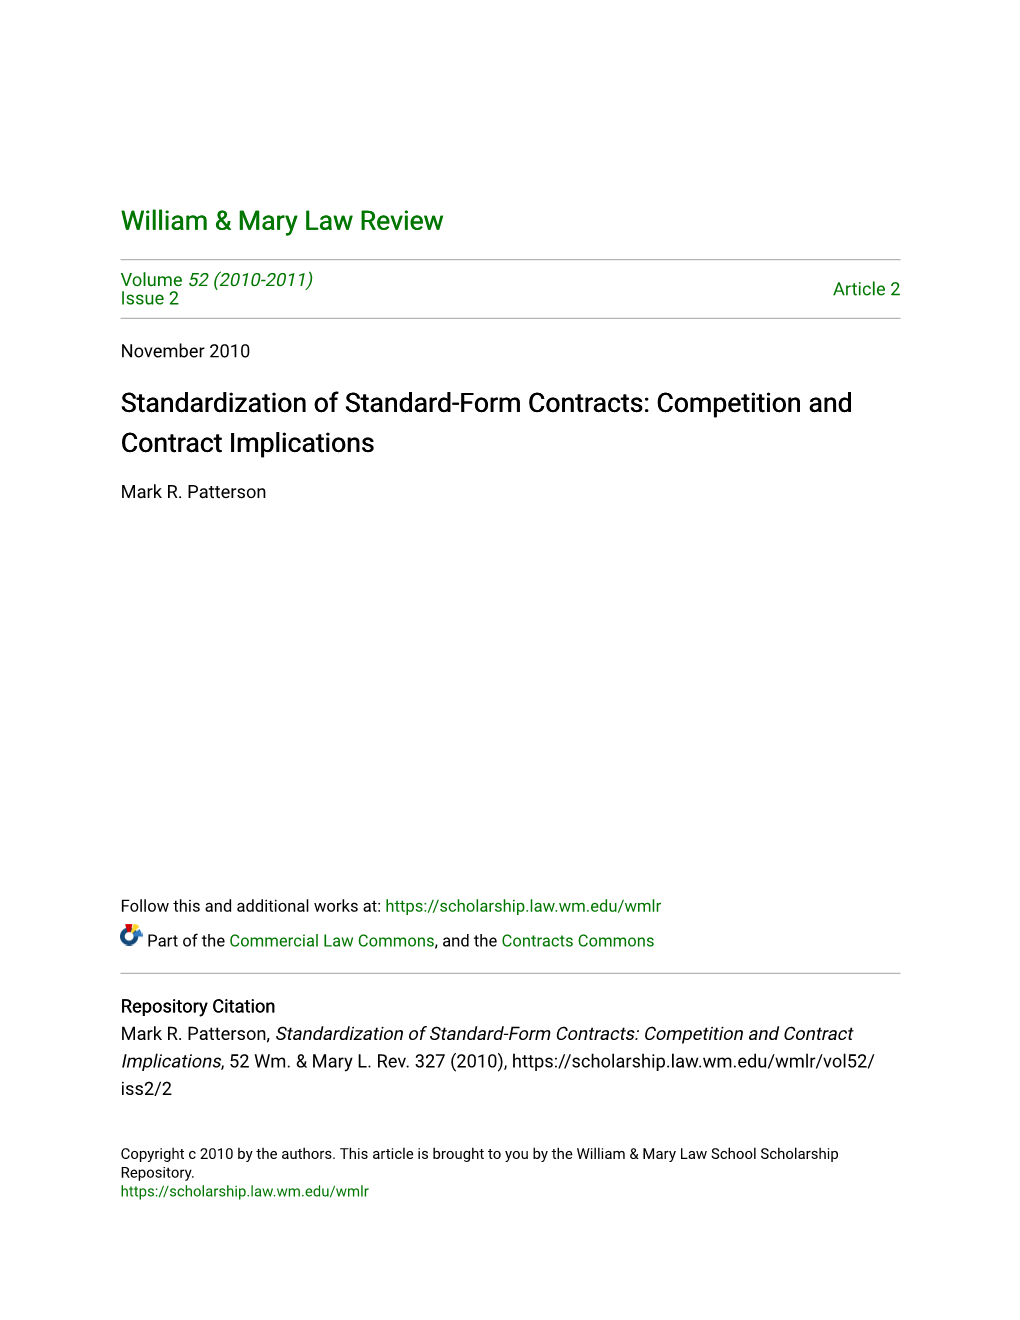 Standardization of Standard-Form Contracts: Competition and Contract Implications